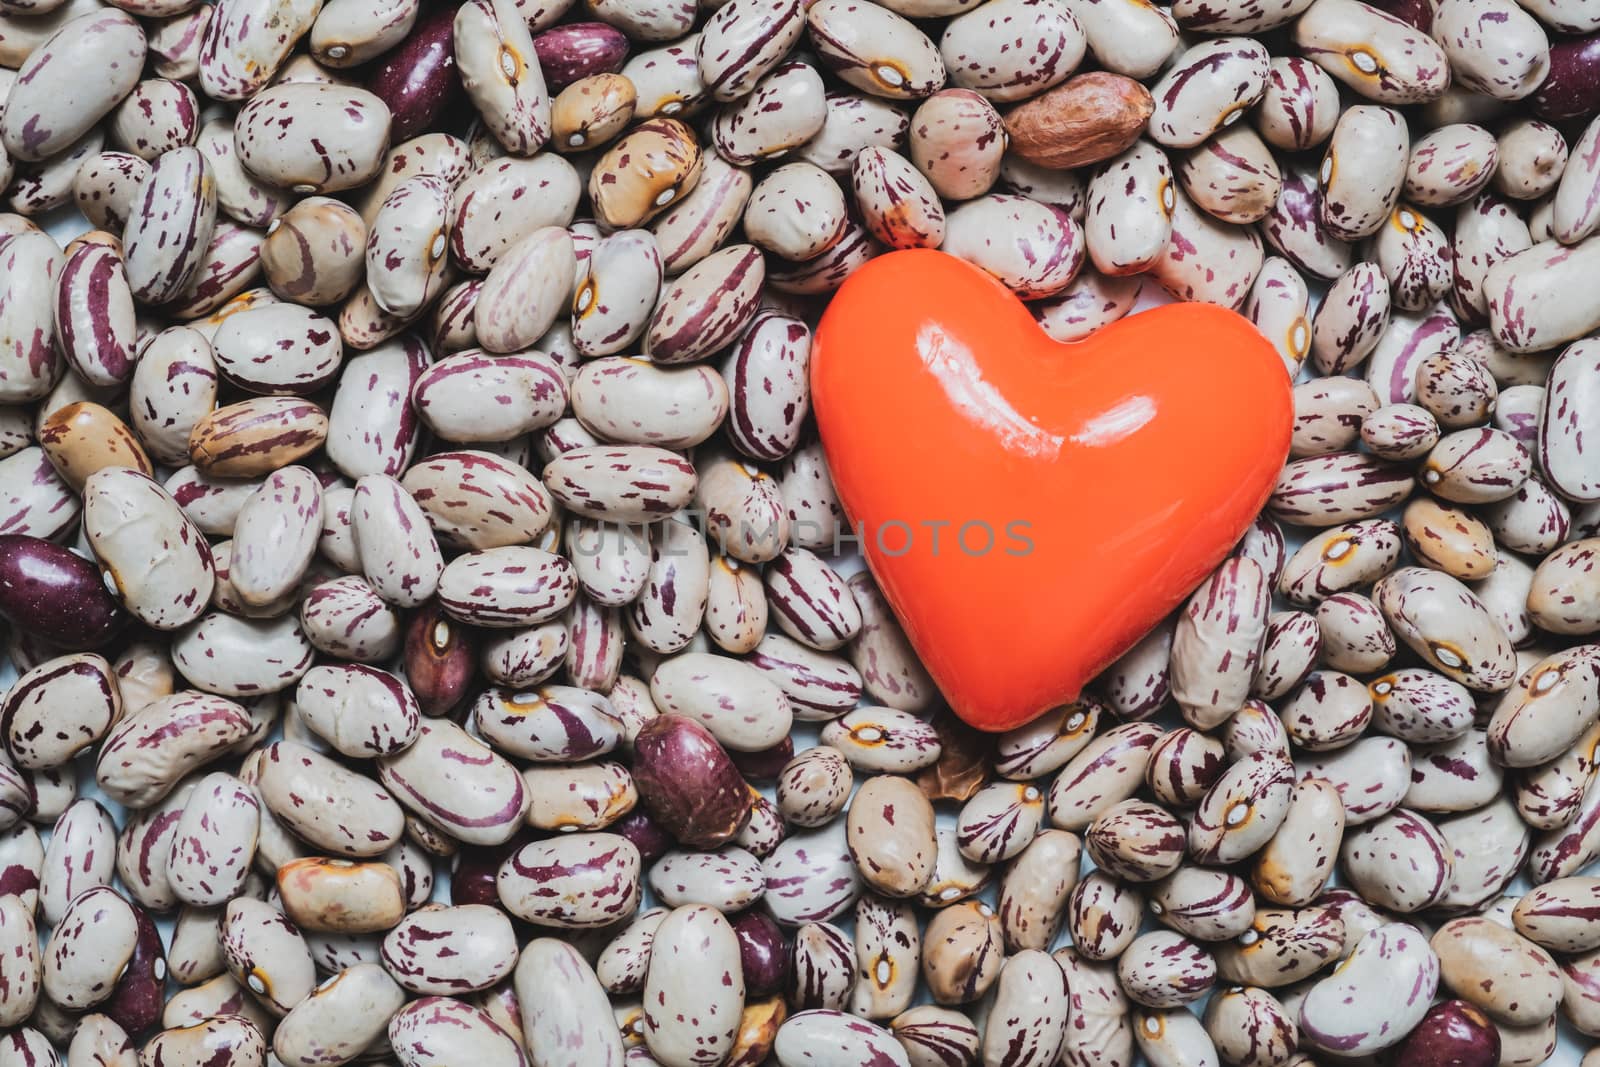 Heart shape on a heap of beans. Food for the heart's health, healthy eating concept.